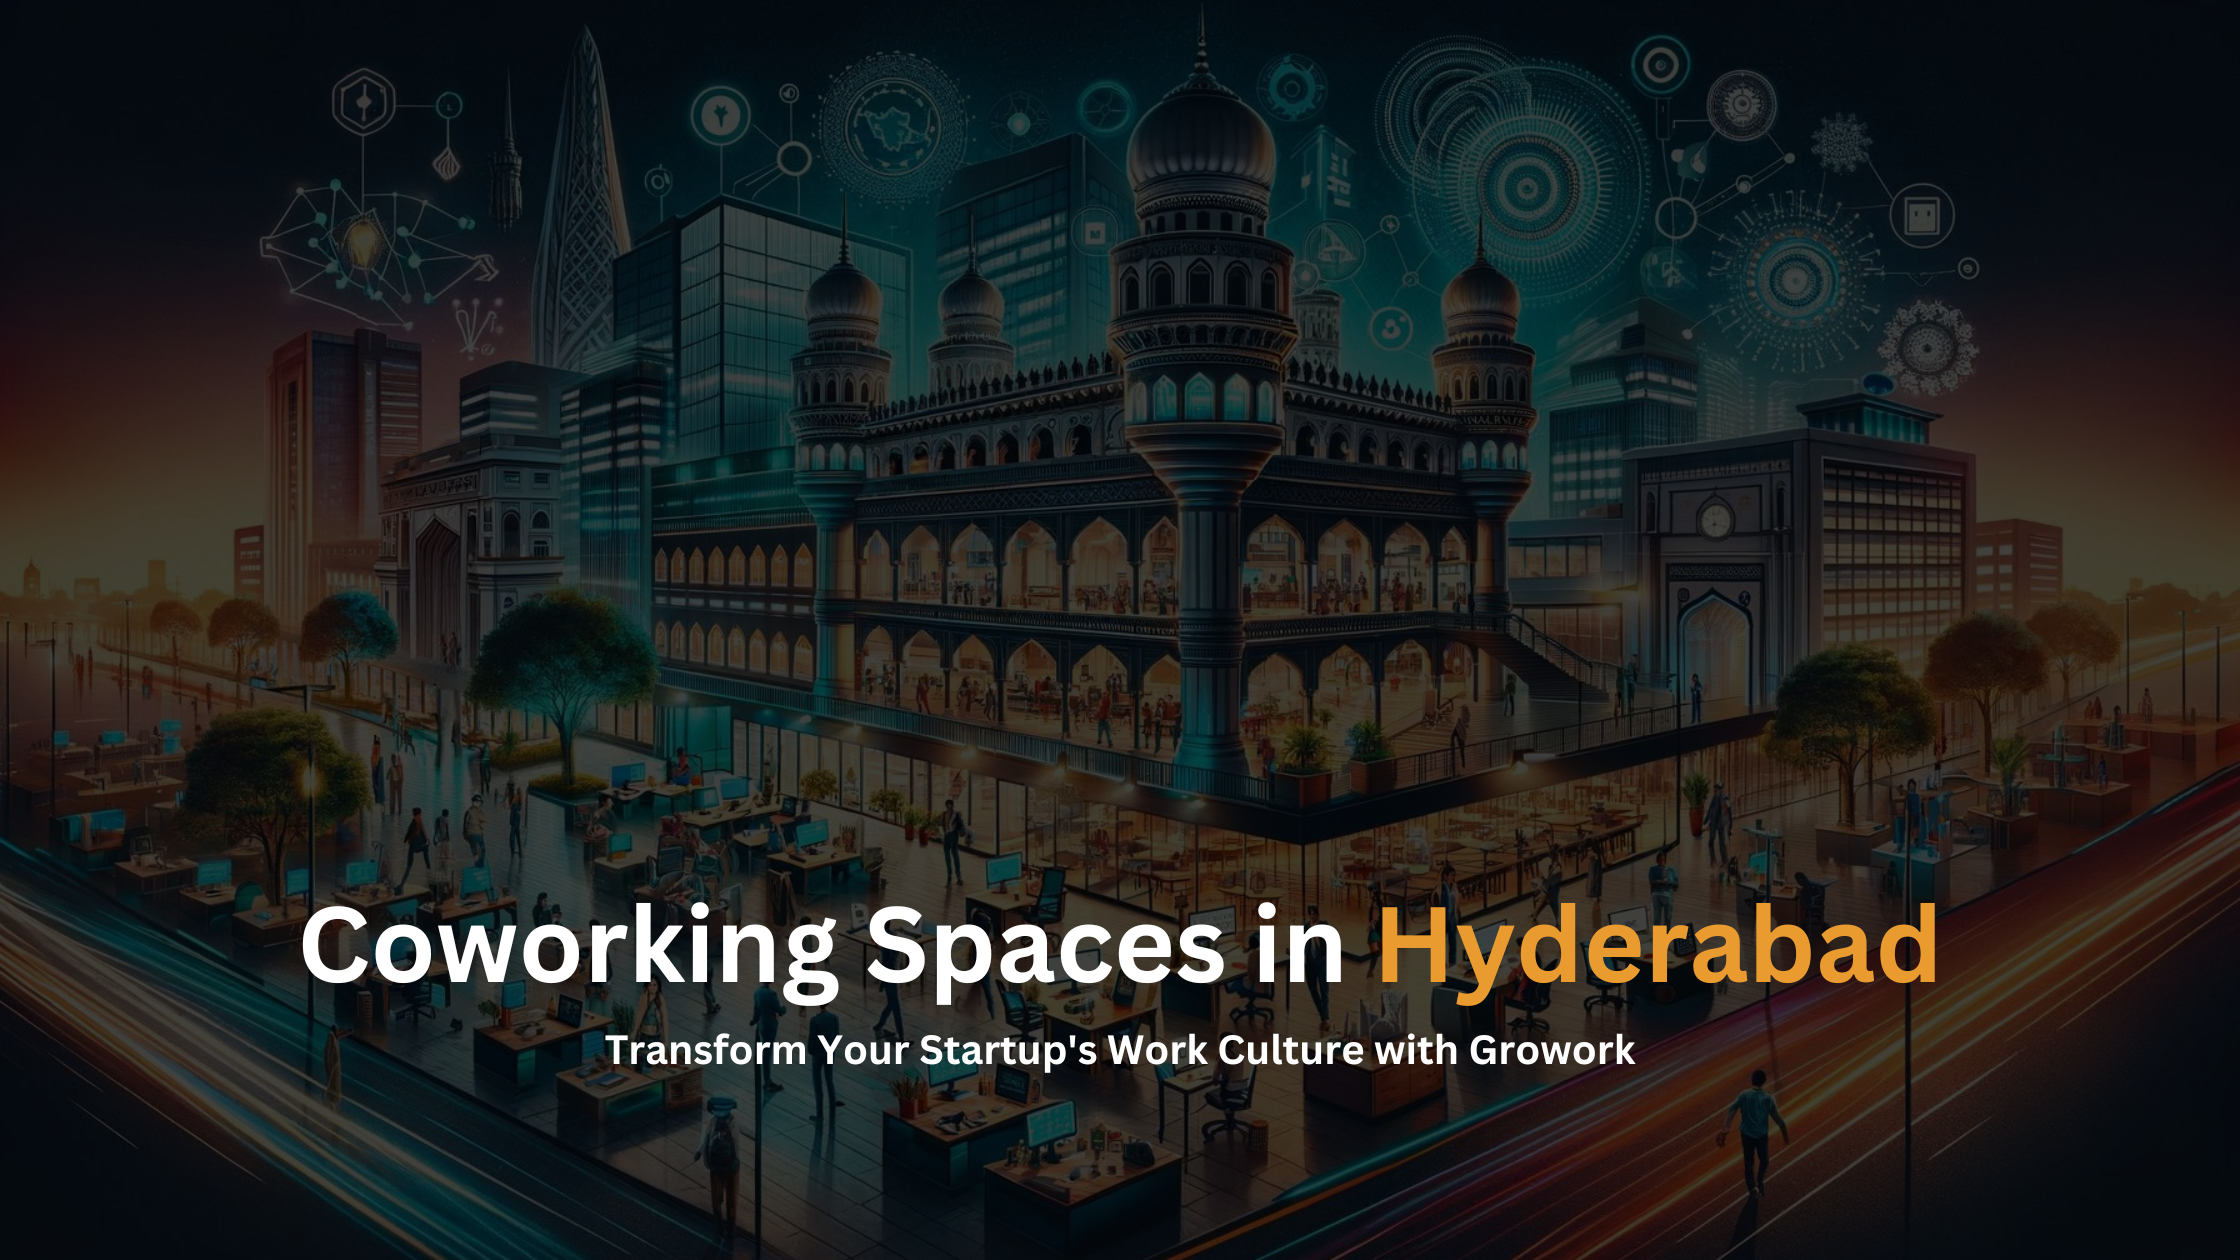 Coworking Spaces in Hyderabad